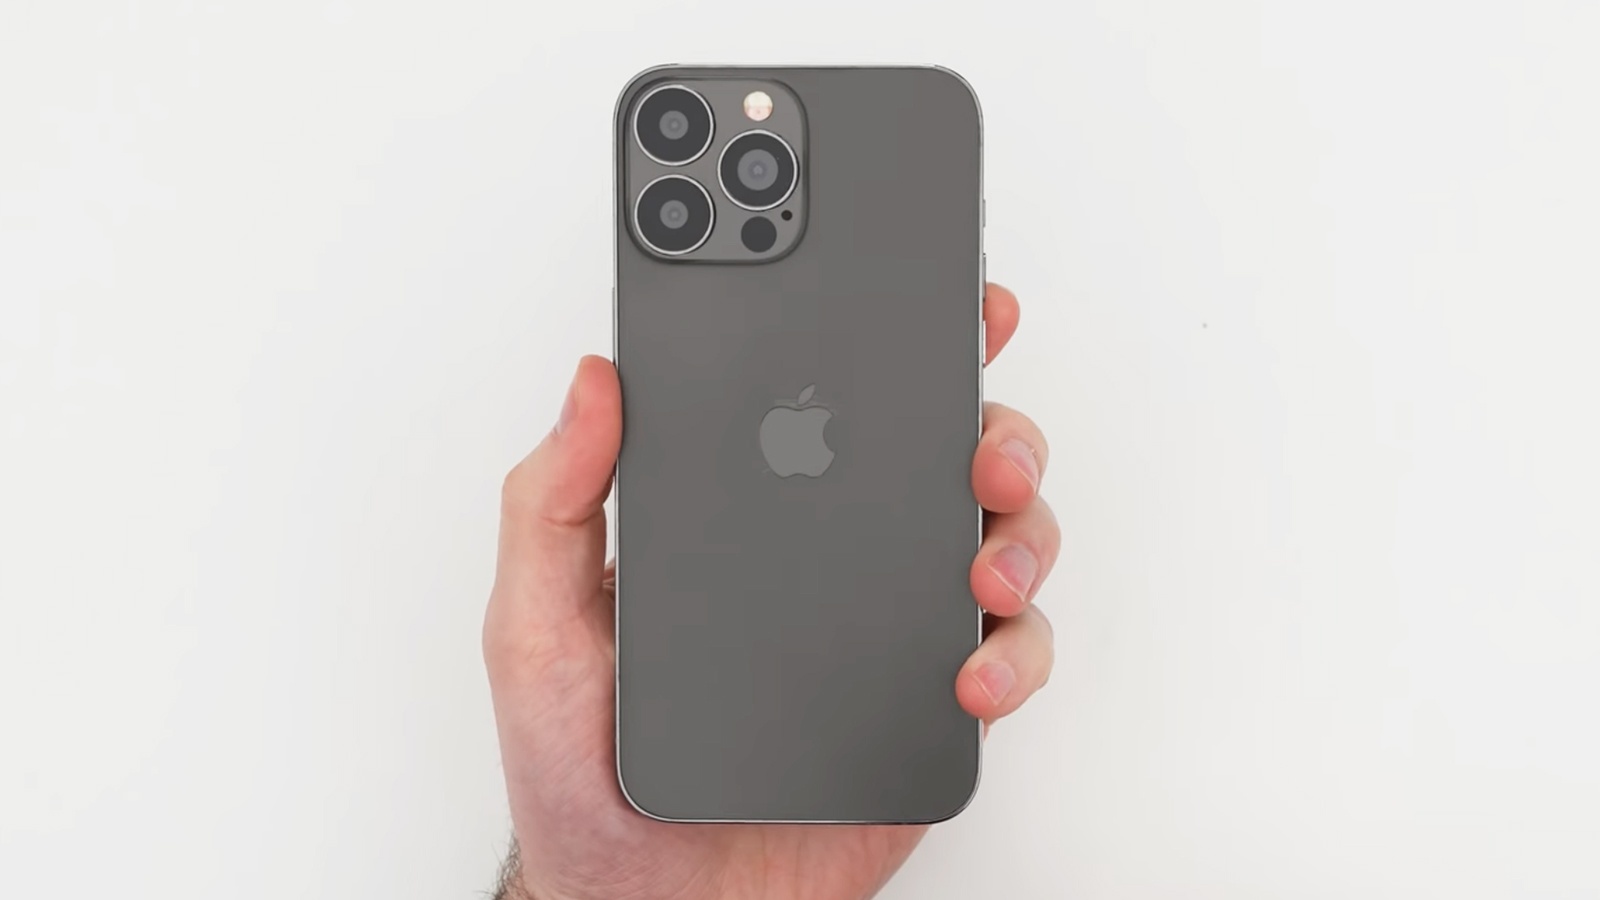 This dummy unit is based on leaked designs of the iPhone 13 Pro Max